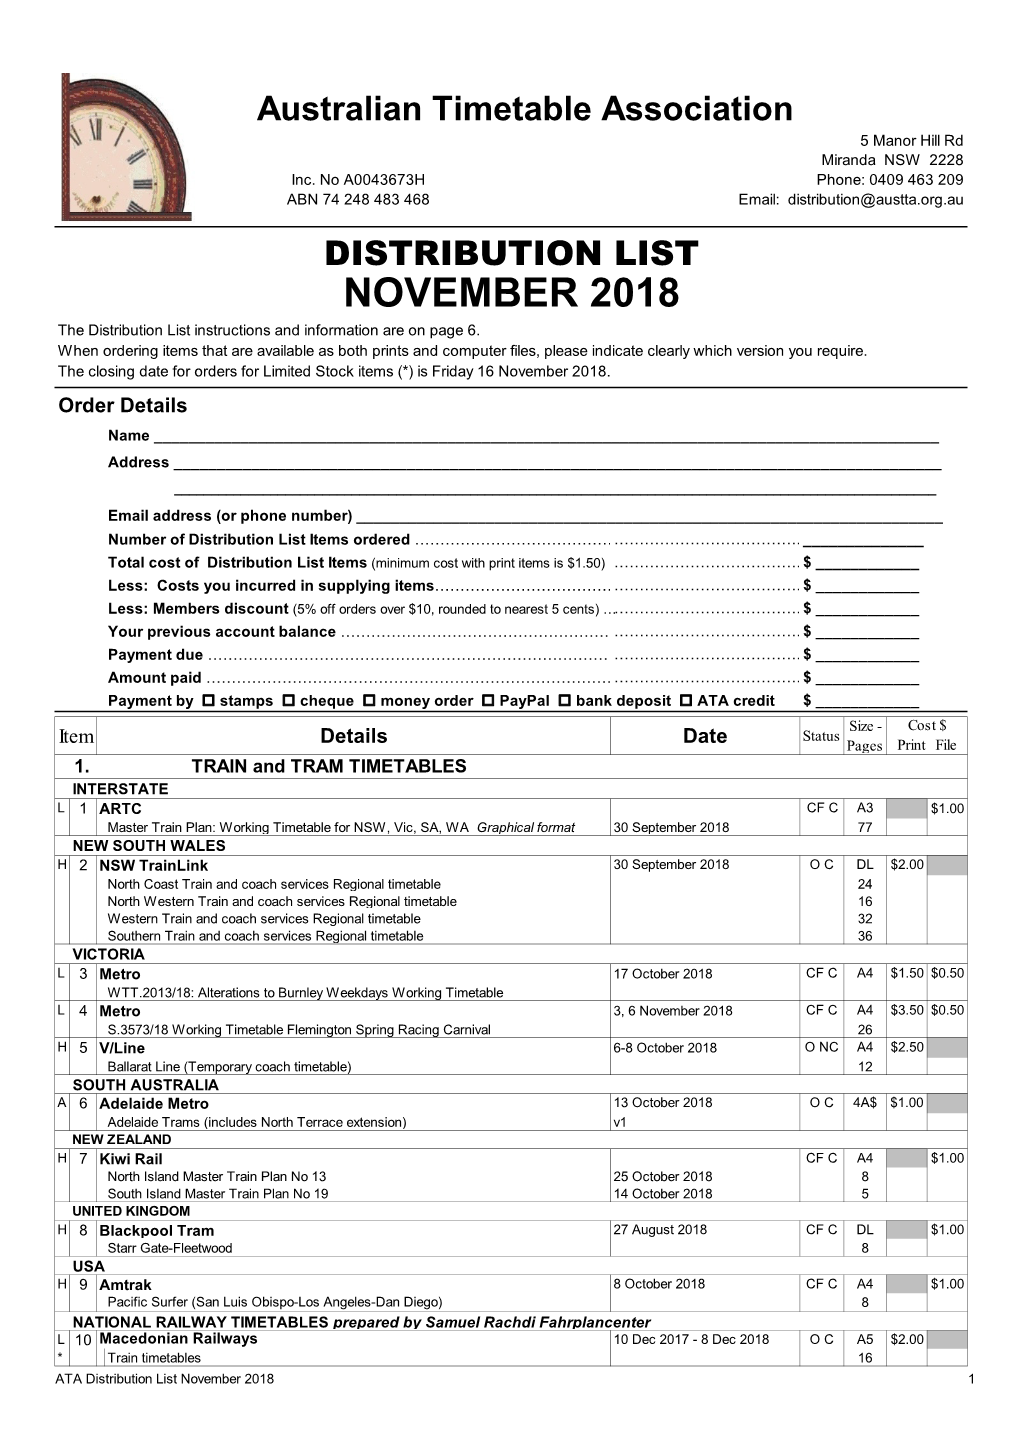 NOVEMBER 2018 the Distribution List Instructions and Information Are on Page 6